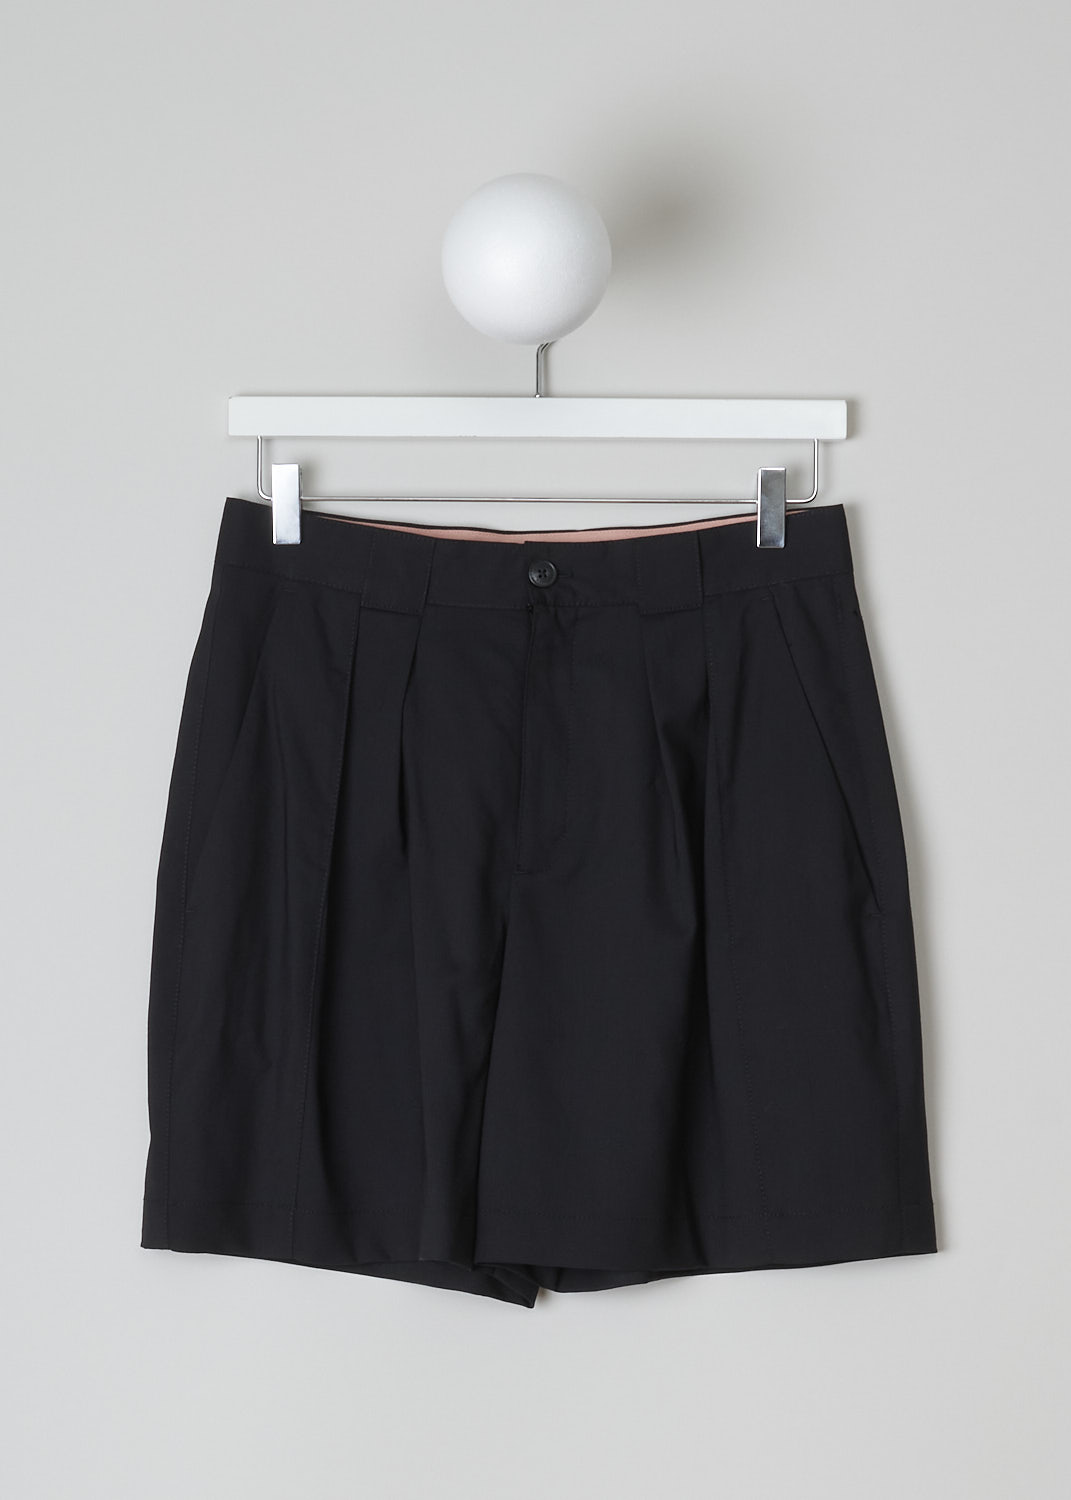 CLOSED, BLACK WOOL SHORTS, JOON_C92051_35H_22_100, Black, Front, These high-waisted black wool shorts have a waistband with belt loops and a button and zipper closure. Subtle knife pleats decorate the front. These shorts have slanted pockets in the front and a single buttoned patch pocket in the back.   
